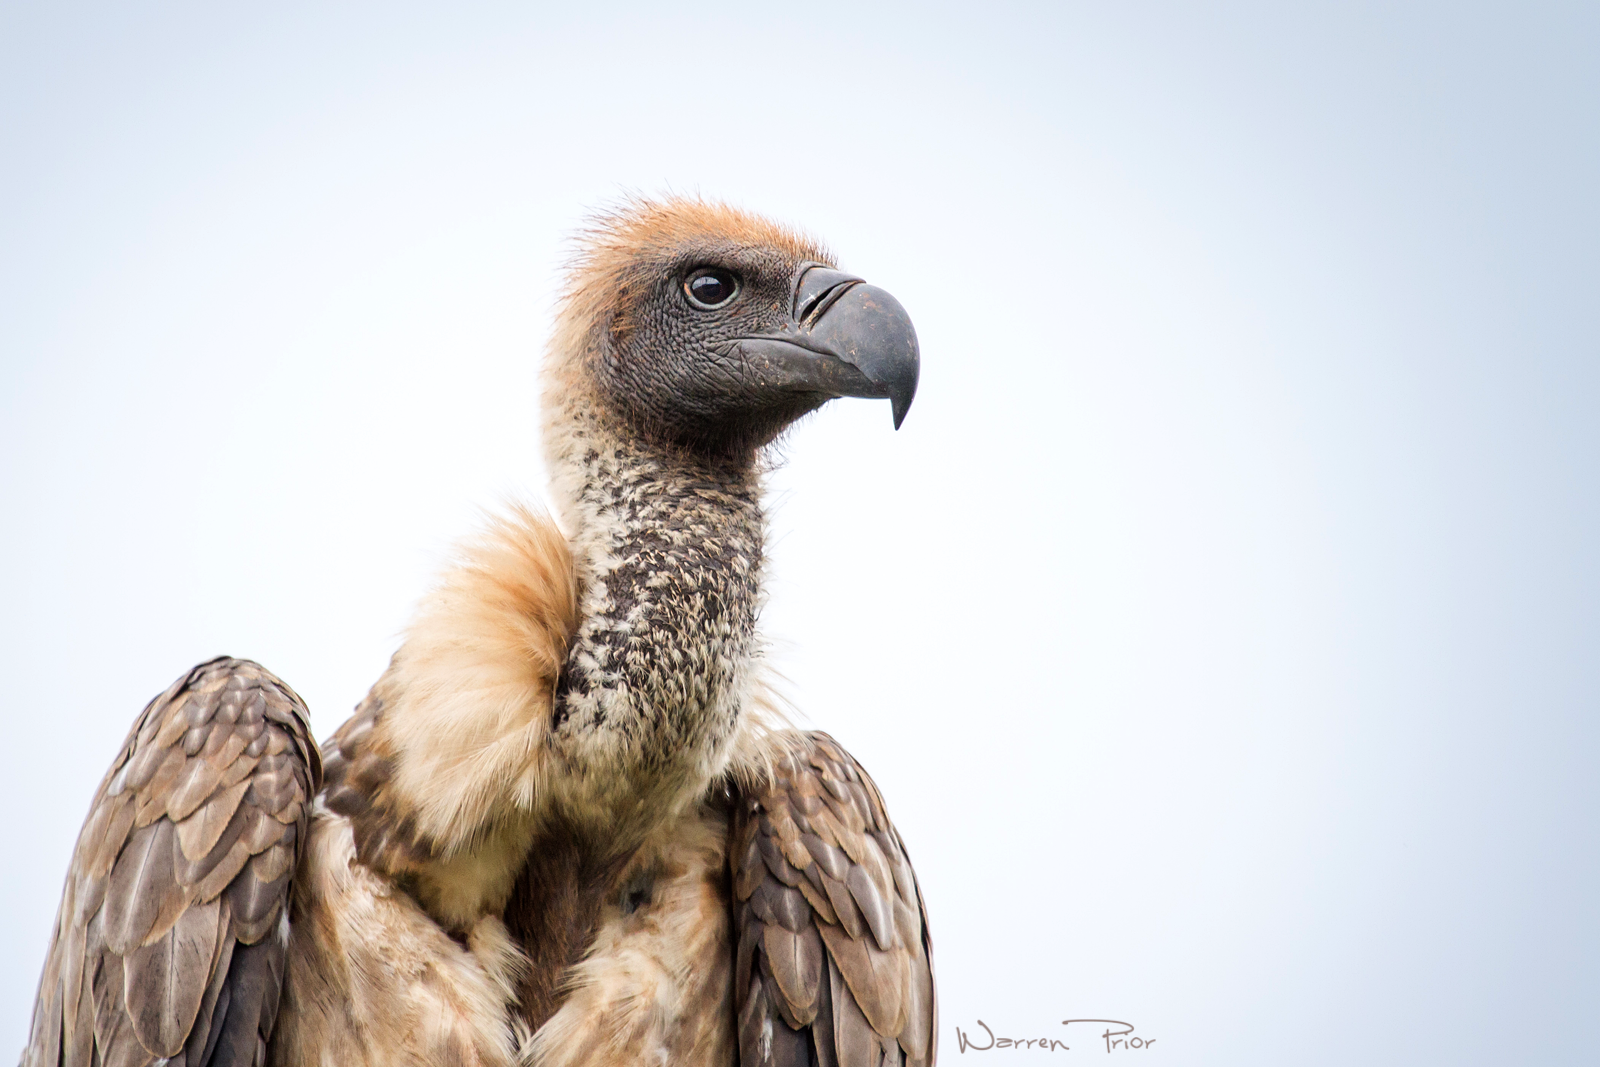 A portrait of a white-backed vulture taken at the iMfolozi game reserve in KwaZulu-Natal